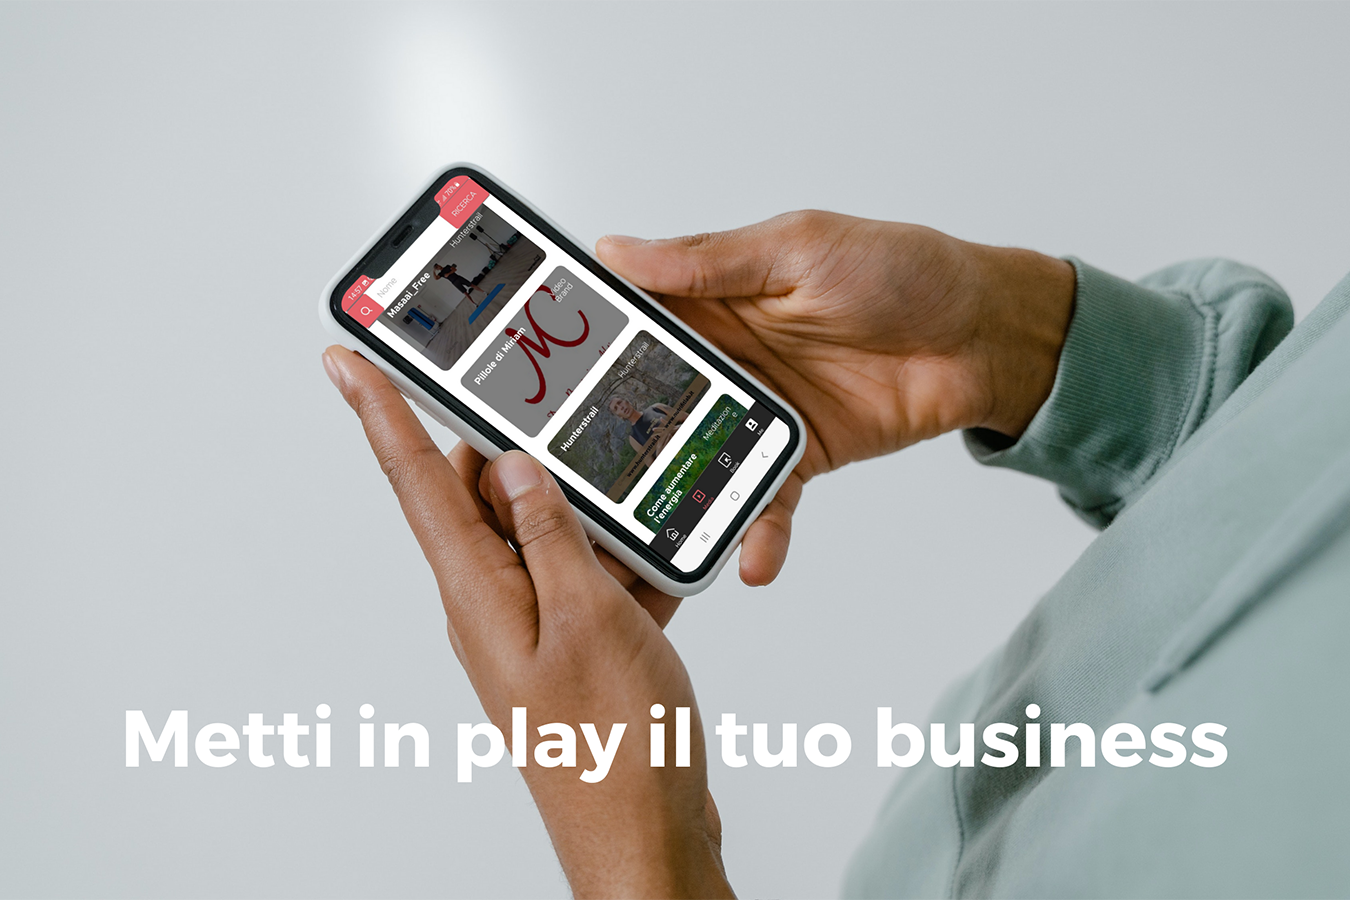 METTI IN “PLAY” IL TUO BUSINESS